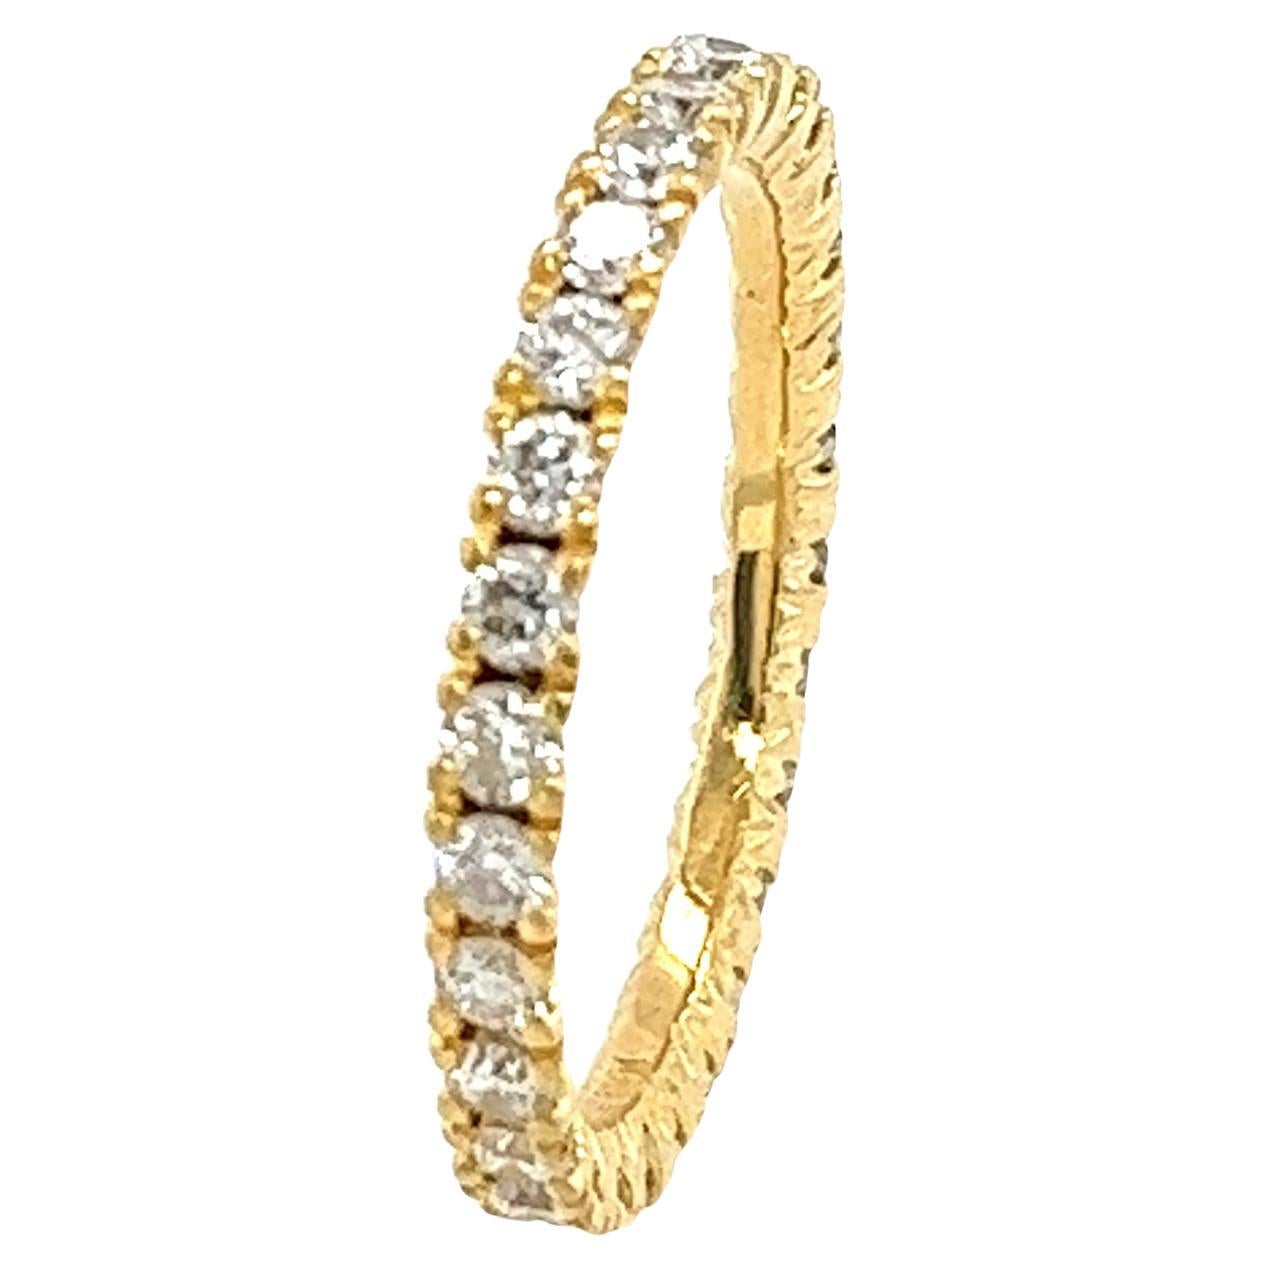 Browns 18ct Yellow Gold Diamond Full Eternity Ring Set With 0.90ct For Sale